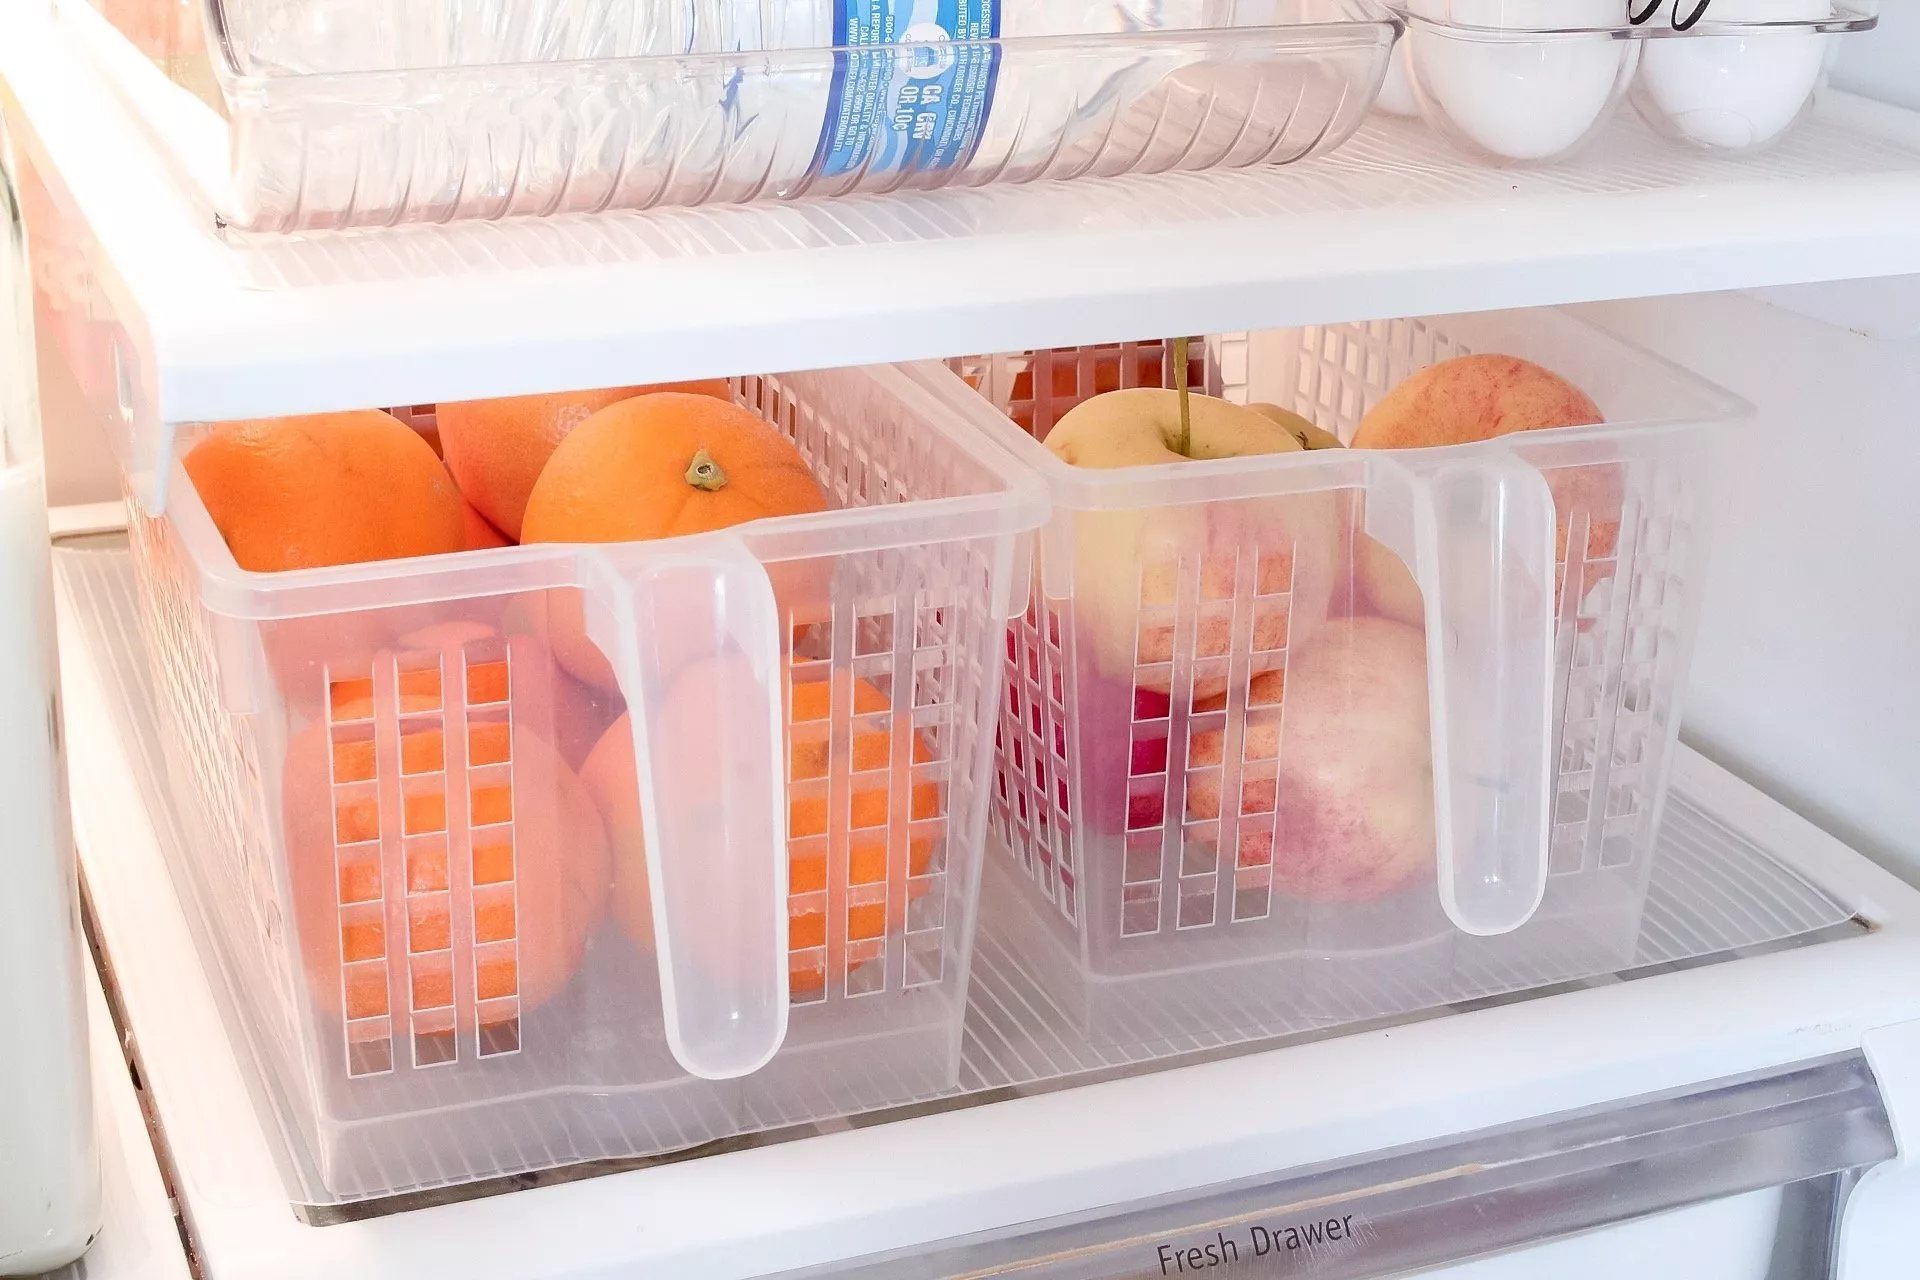 Apples and oranges in small storage baskets inside our fridge with handles for easy pull-out and grab